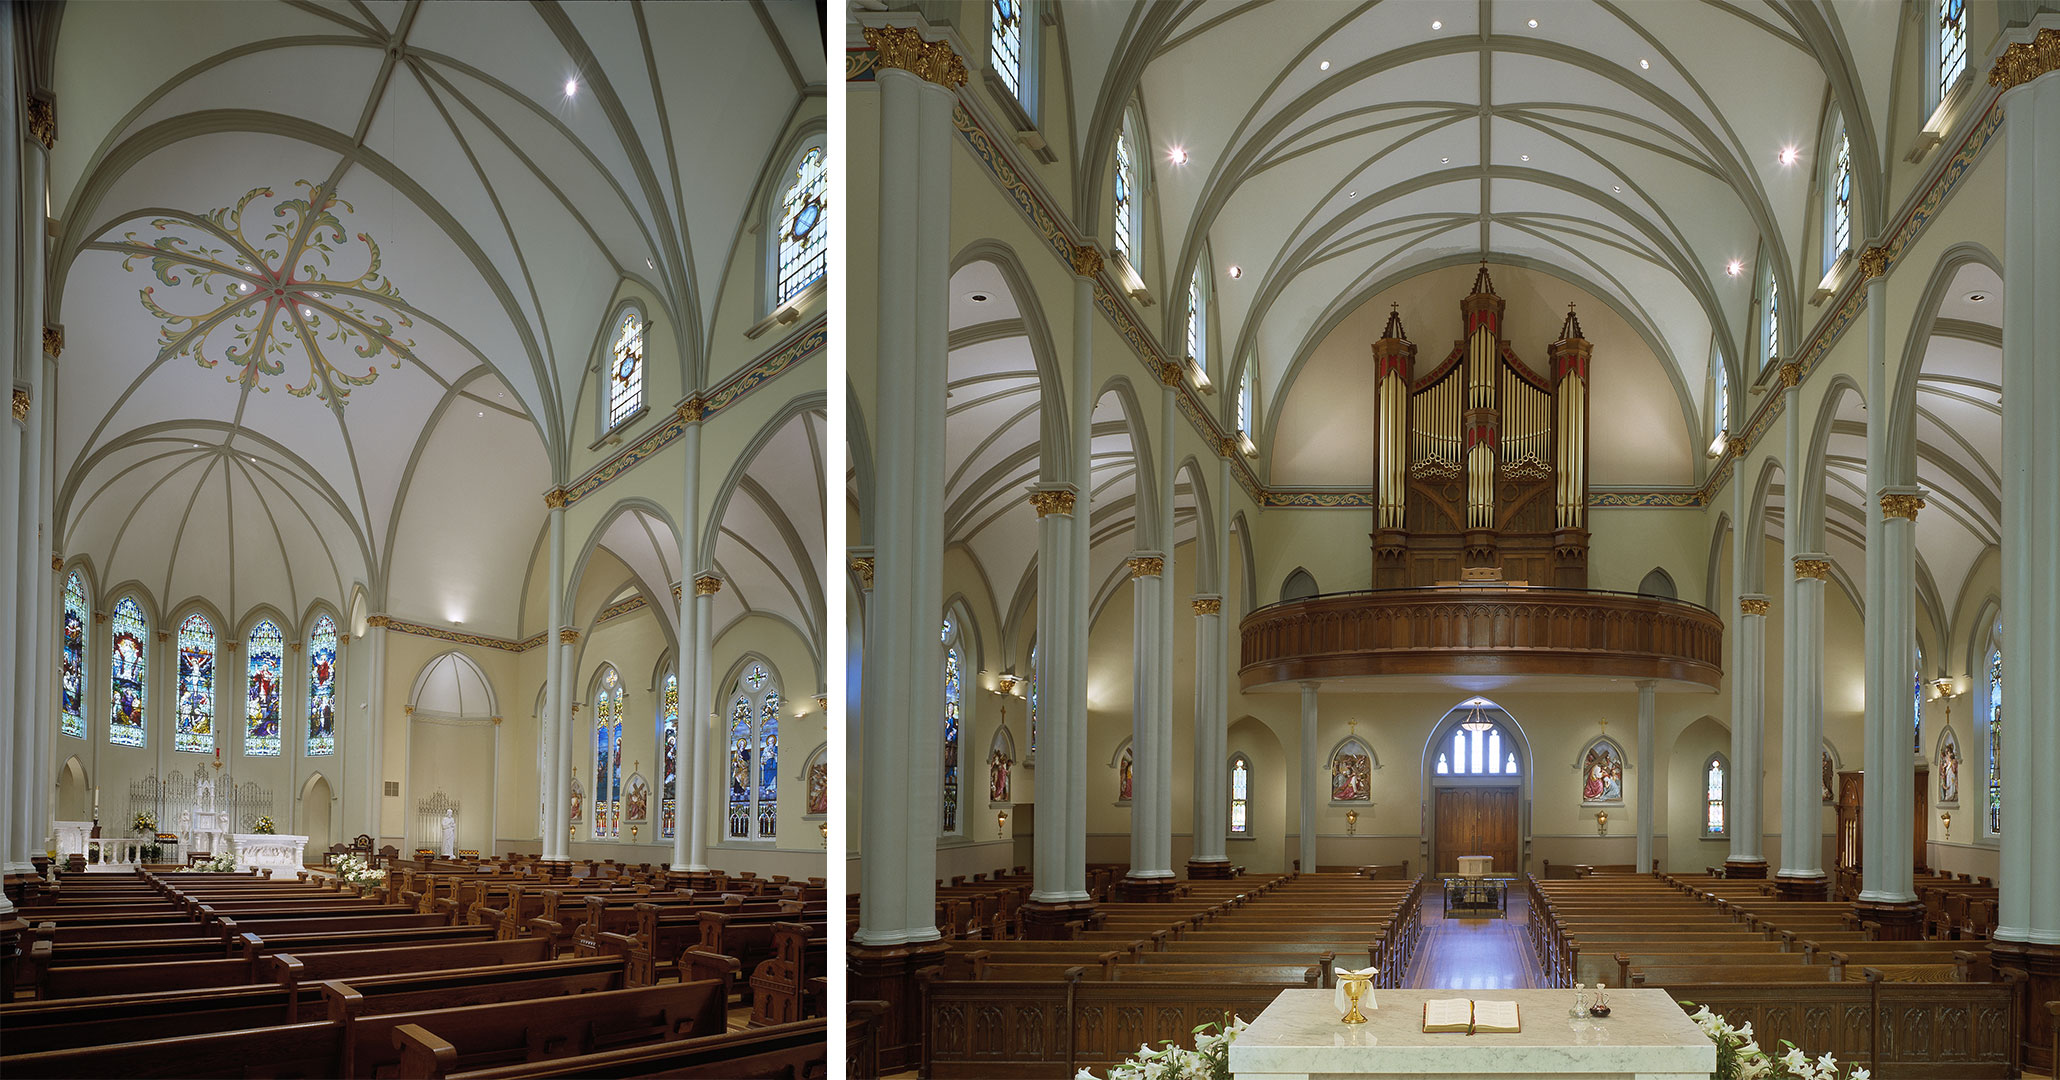 Historic Preservationists at Boudreaux worked with St Peter’s Catholic Church to update and modernize the Basilica.